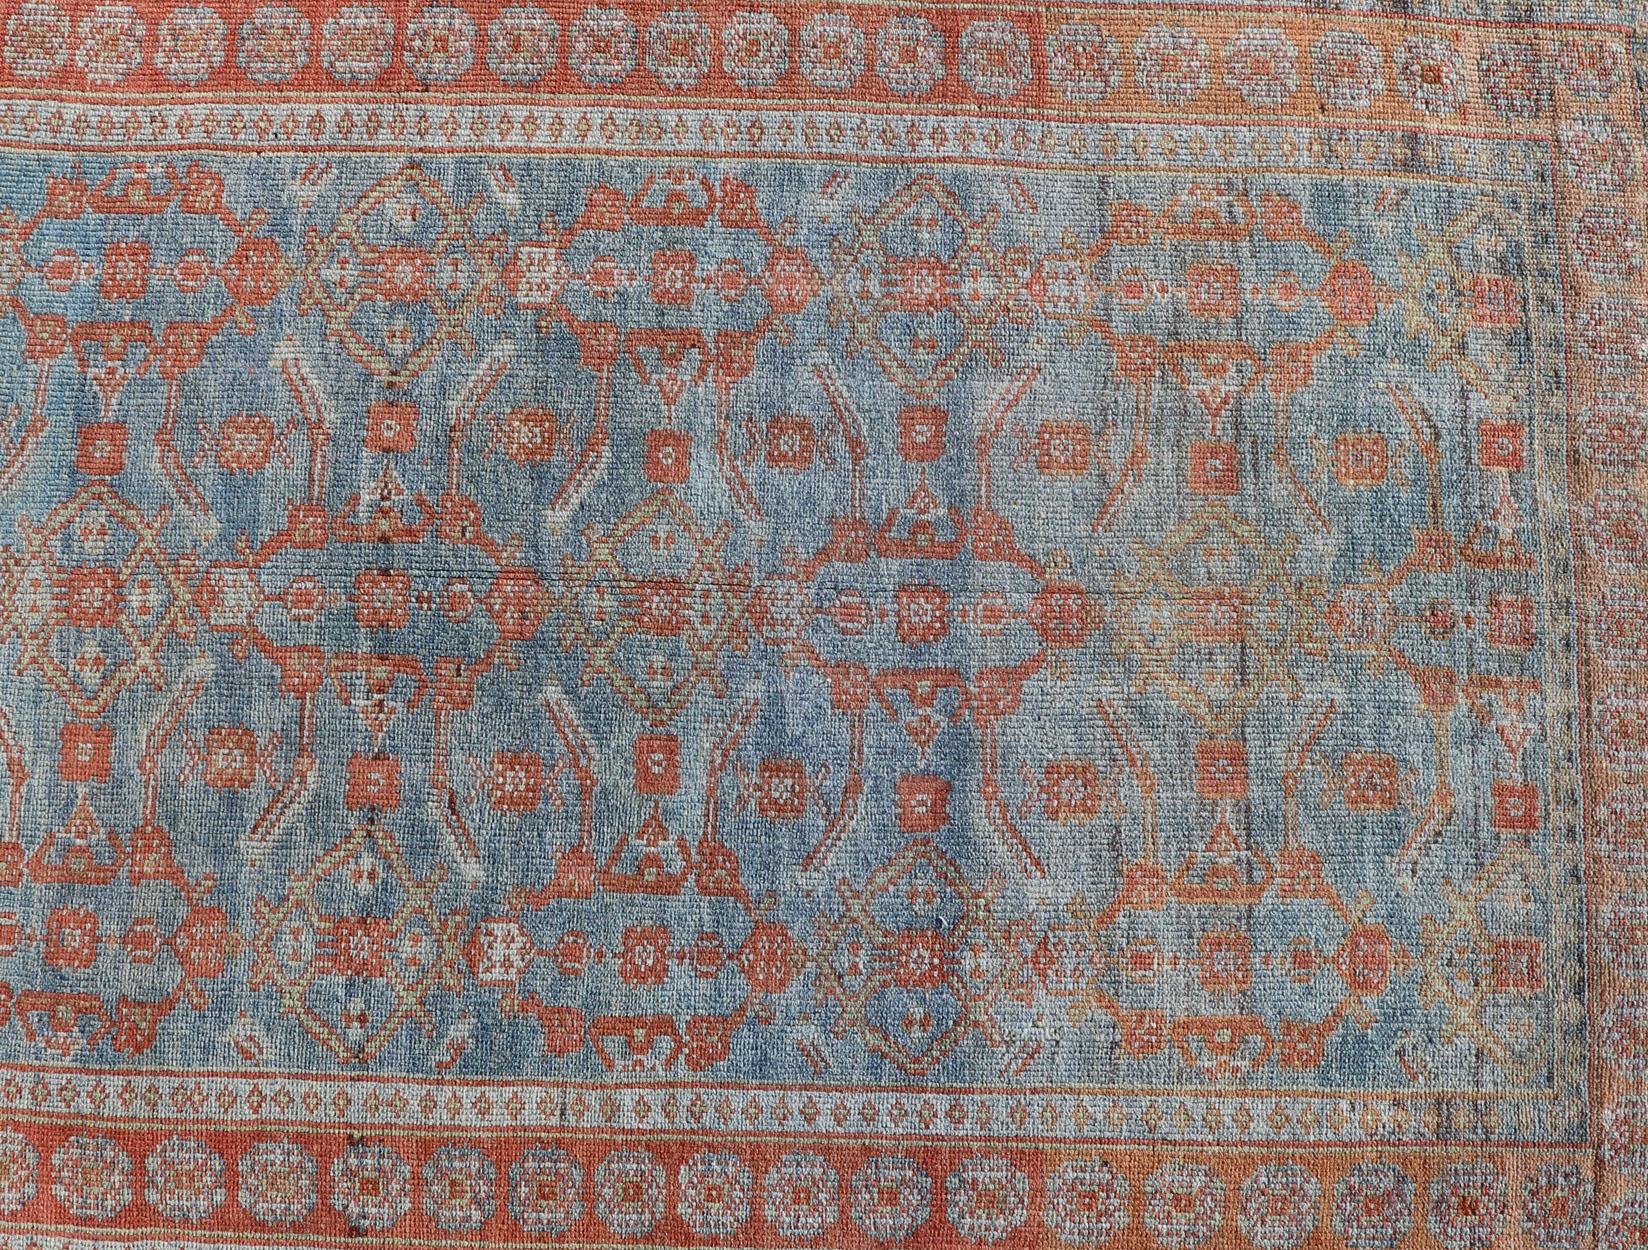  Antique Persian Long Runner with Blossoming Geometric Design in Light Blue In Good Condition For Sale In Atlanta, GA